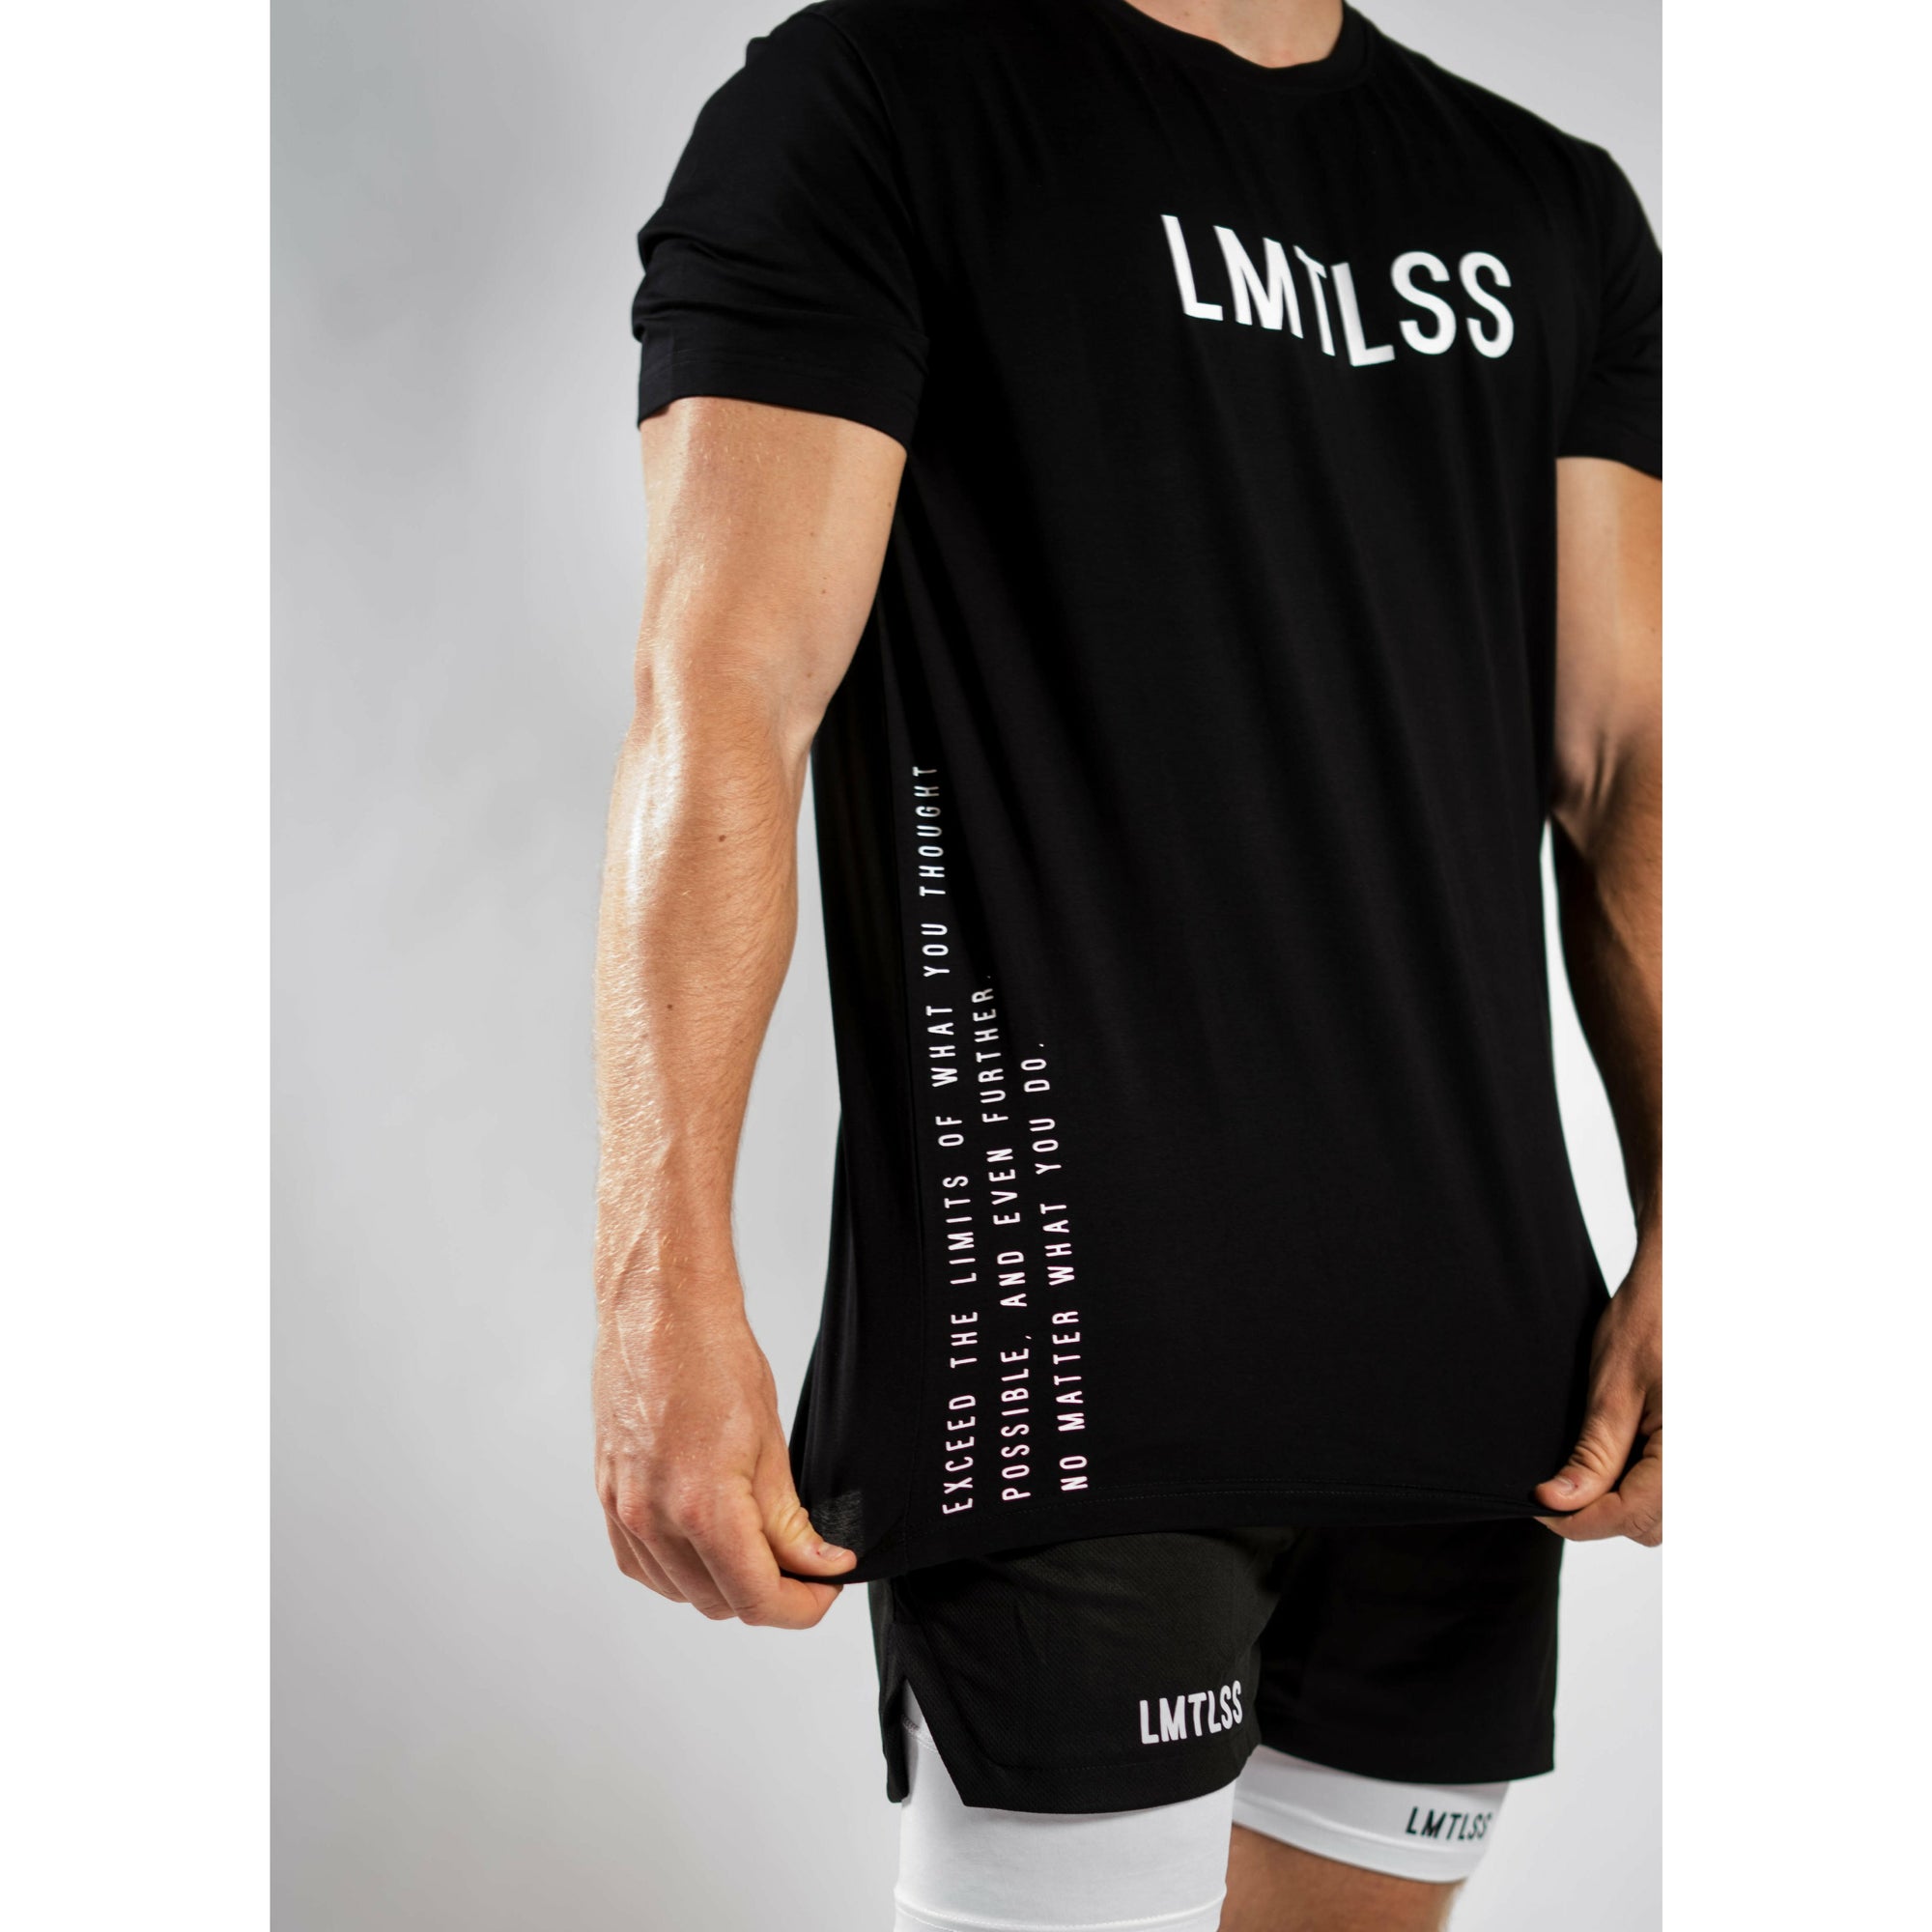 Exceed Your Limits T-Shirt